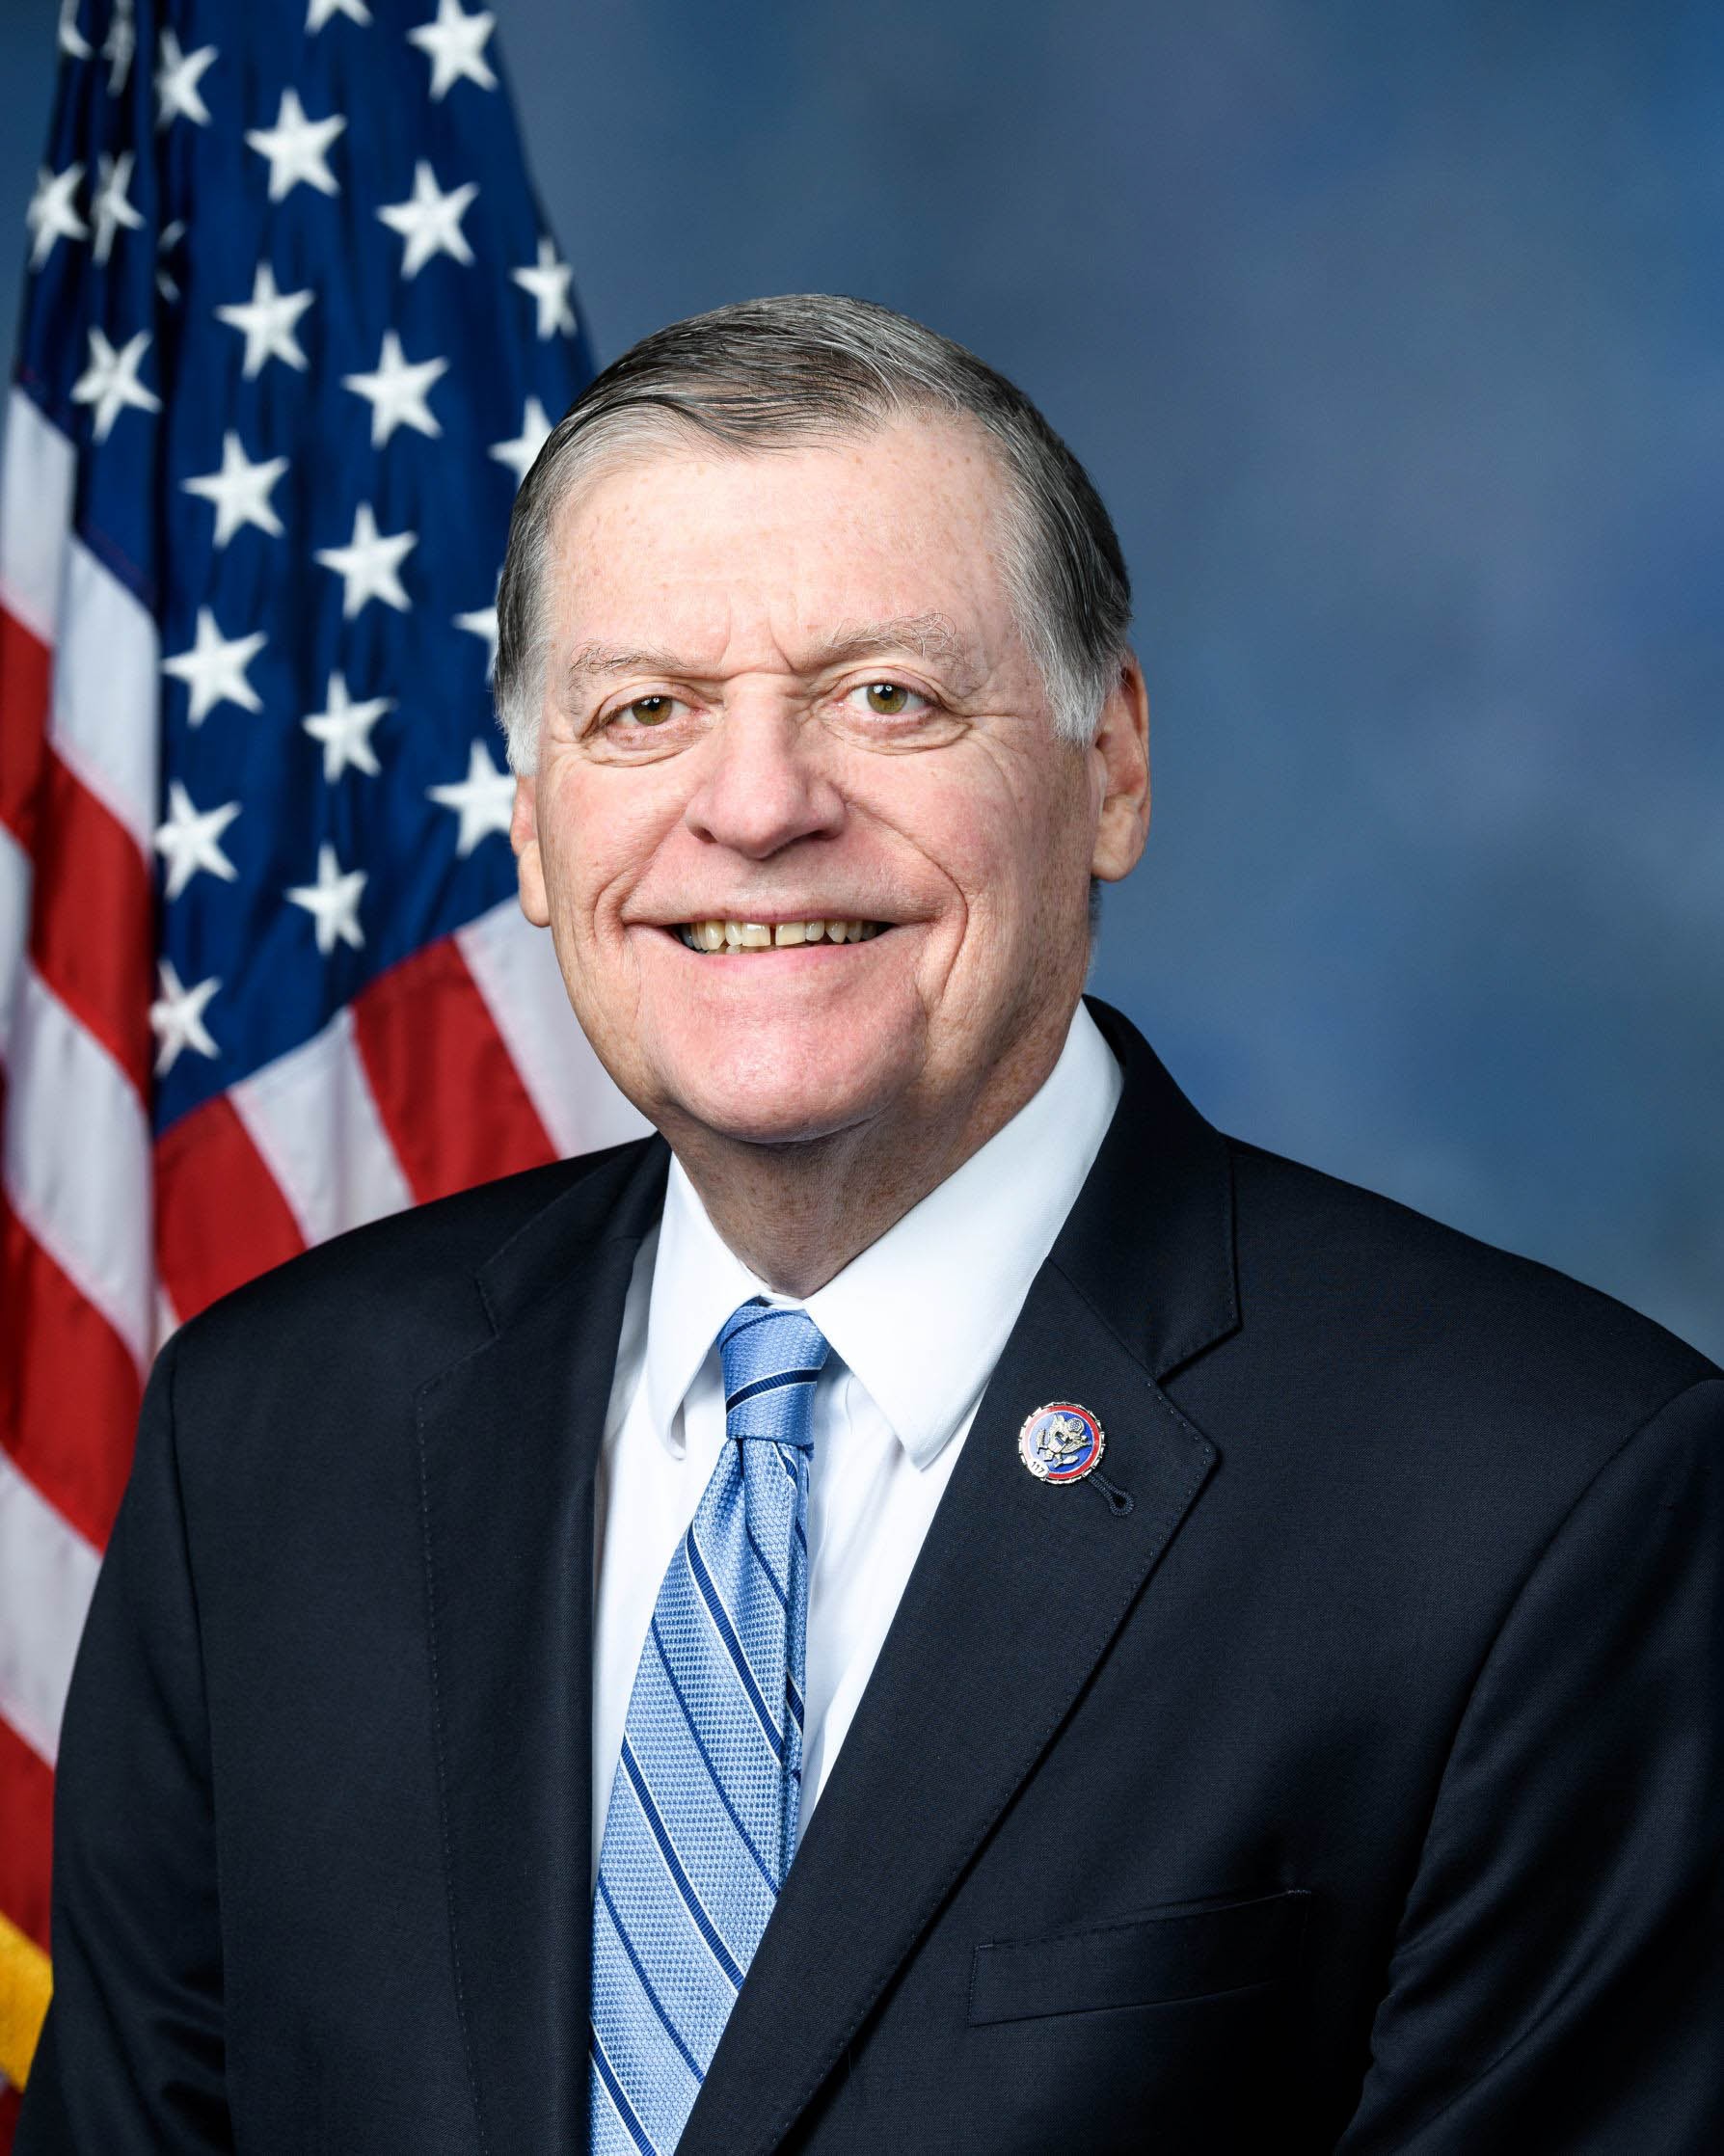 Rep. Tom Cole Set to Lead House Appropriations Committee